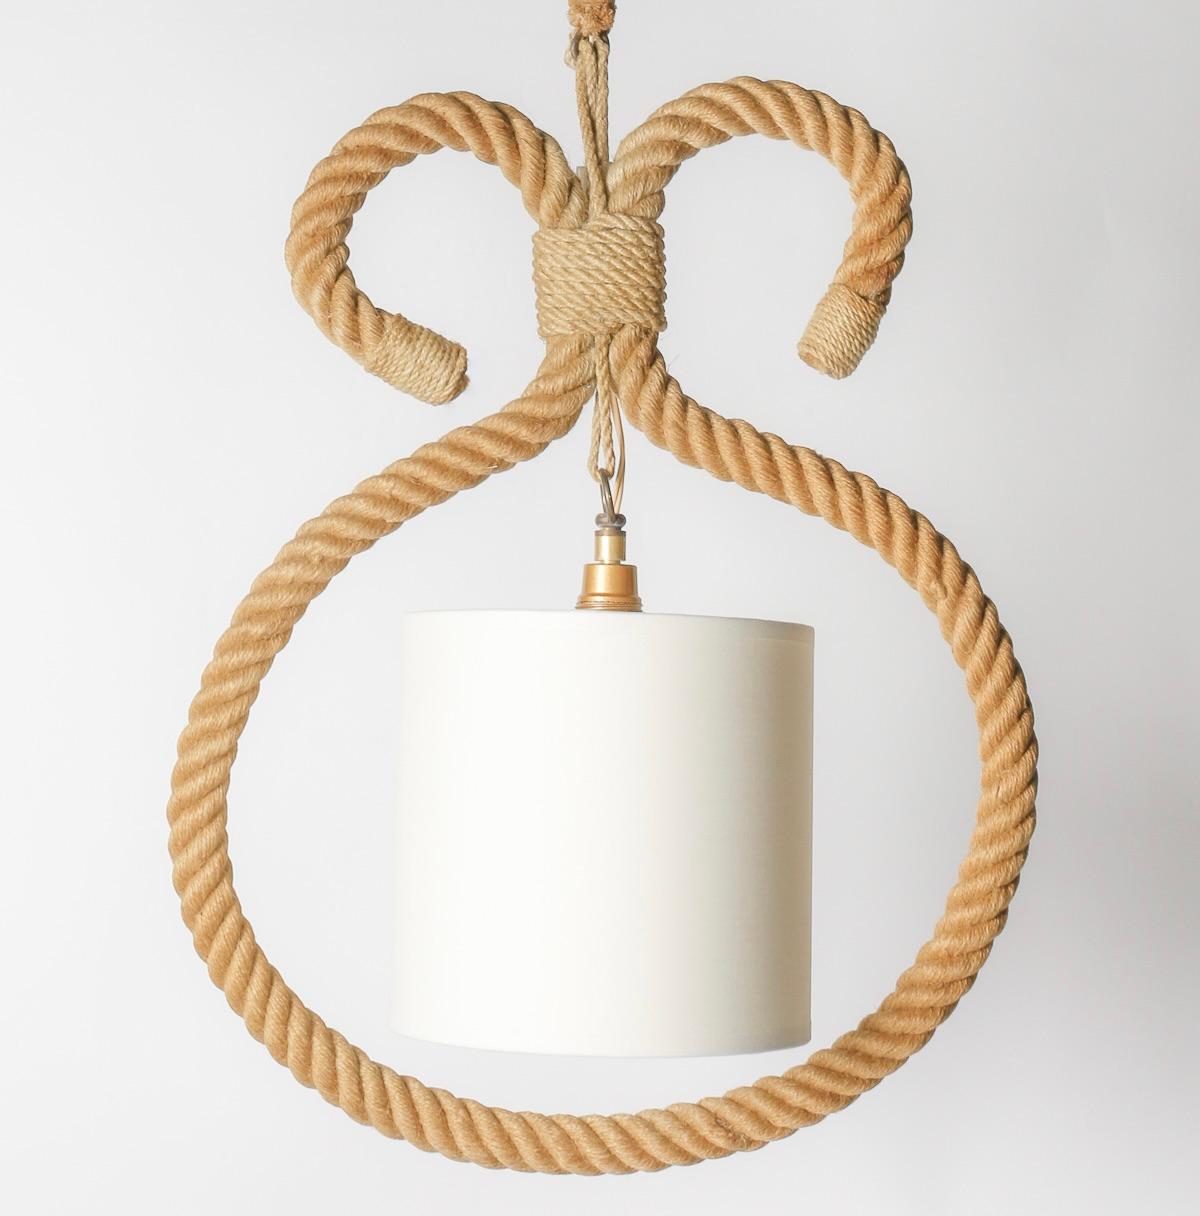 Composed of a luminous central rod formed by a rope arm adorned with a loop on the upper part and serving to support the lantern on the lower part.
The body of the lantern consists of a round rope stem linked by a rope thread, decorated with a